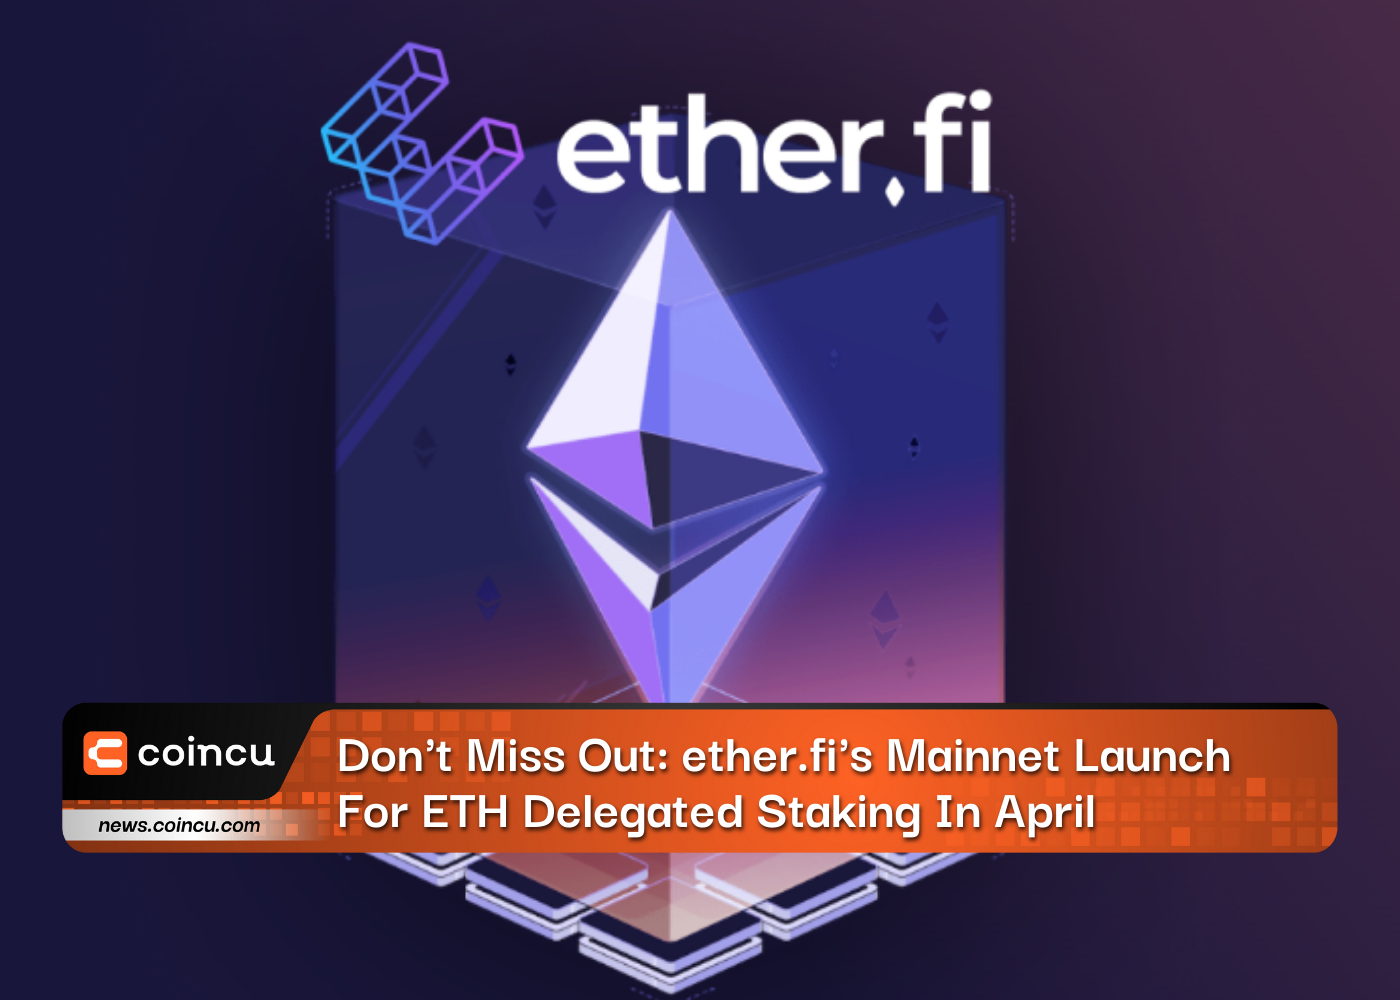 Don't Miss Out: ether.fi's Mainnet Launch For ETH Delegated Staking In April